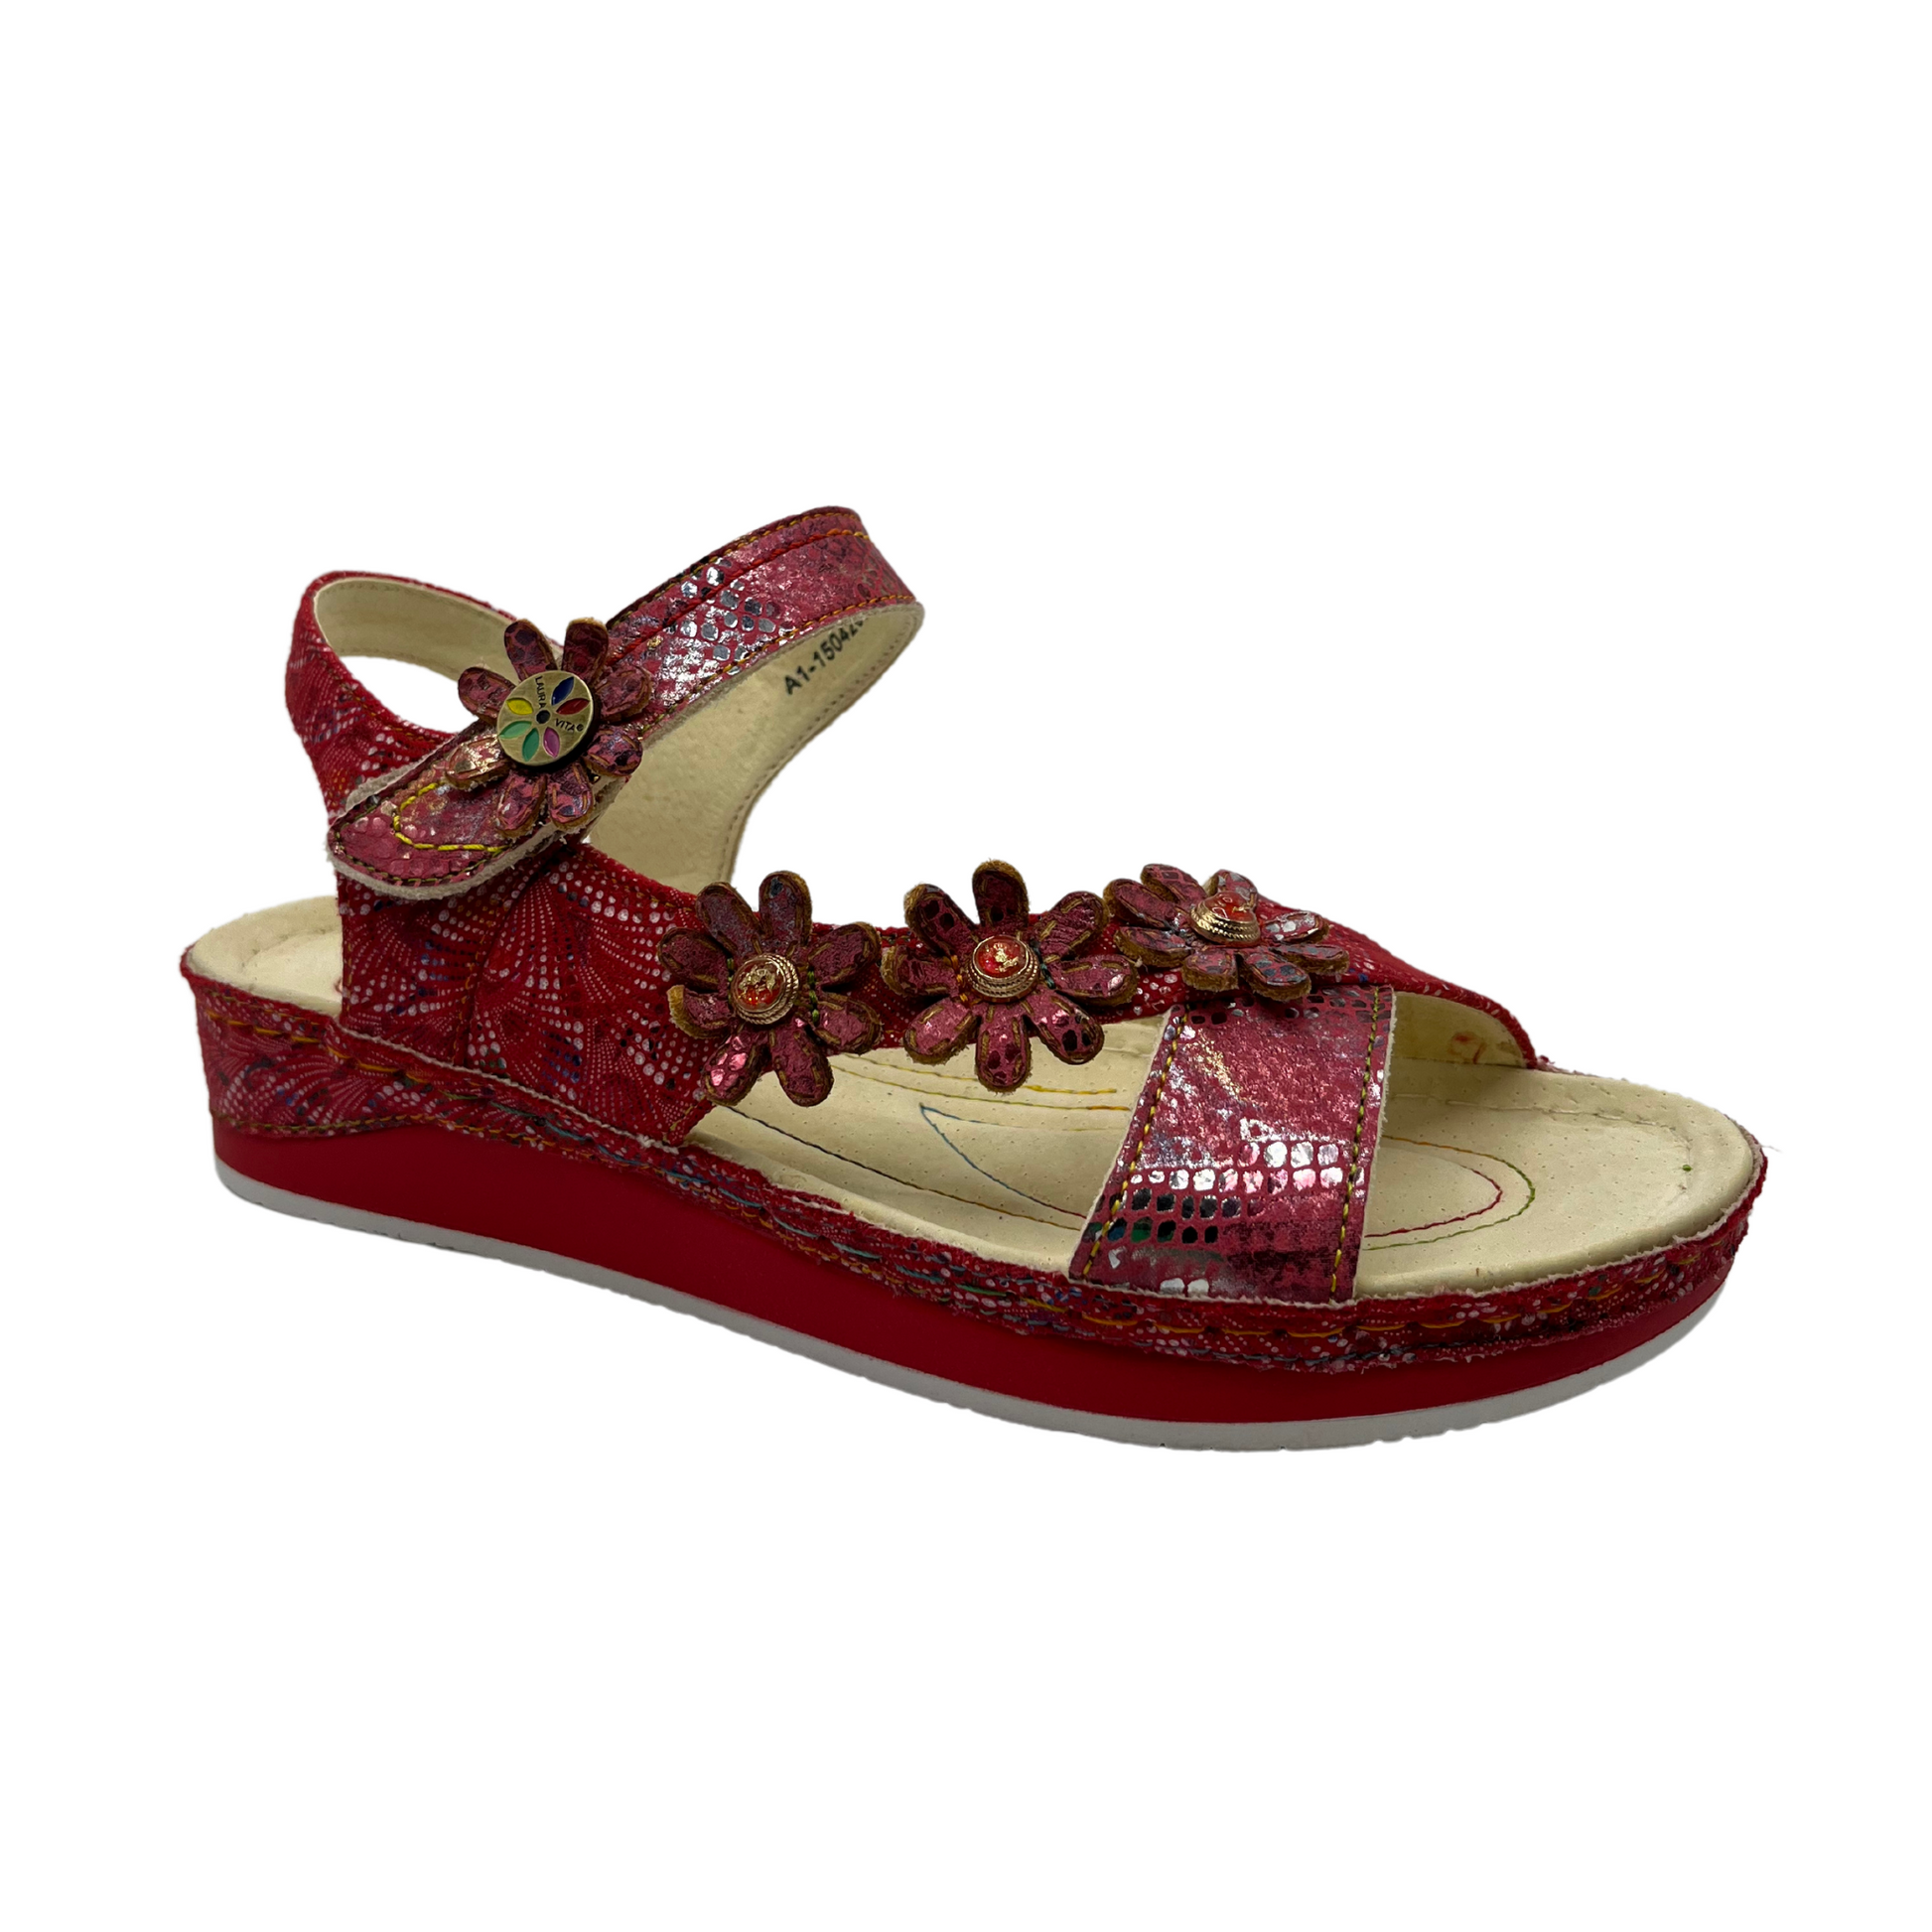 45 degree angled view of a red leather sandal with flower details and velcro ankle strap